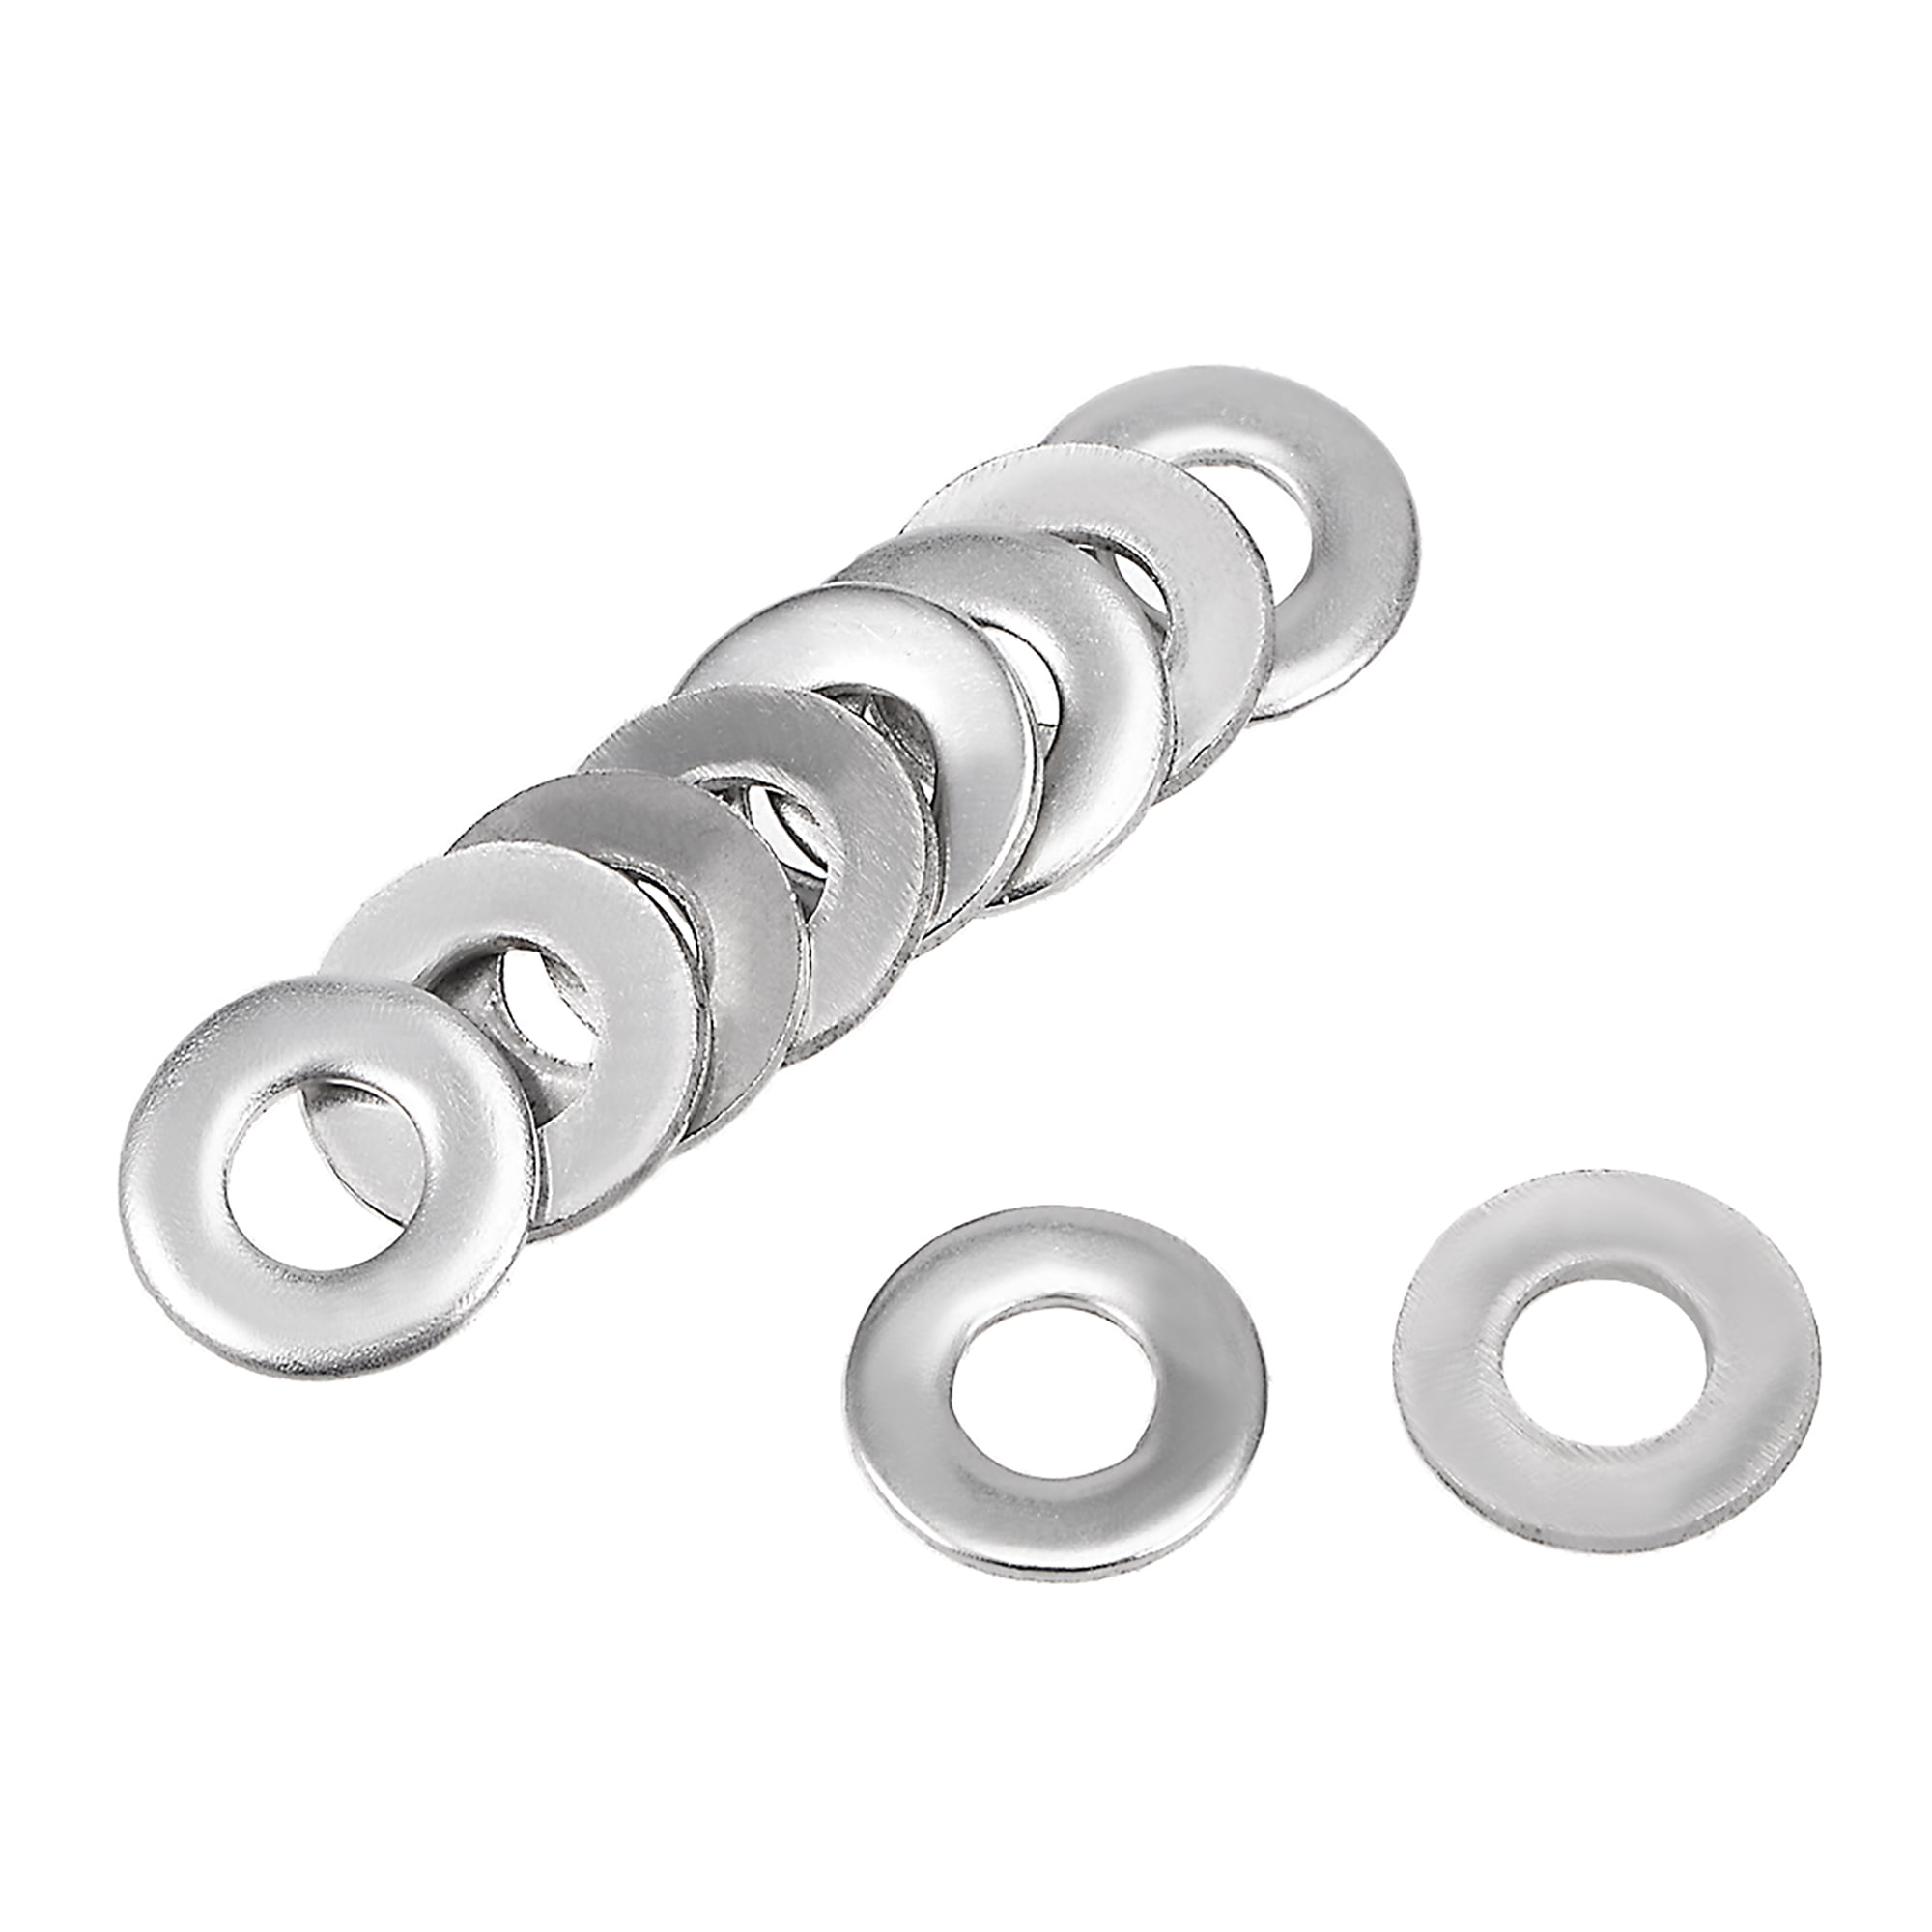 10 Pcs 20mm x 16.5mm x 0.8mm 304 Stainless Steel Flat Washer for Screw Bolt 